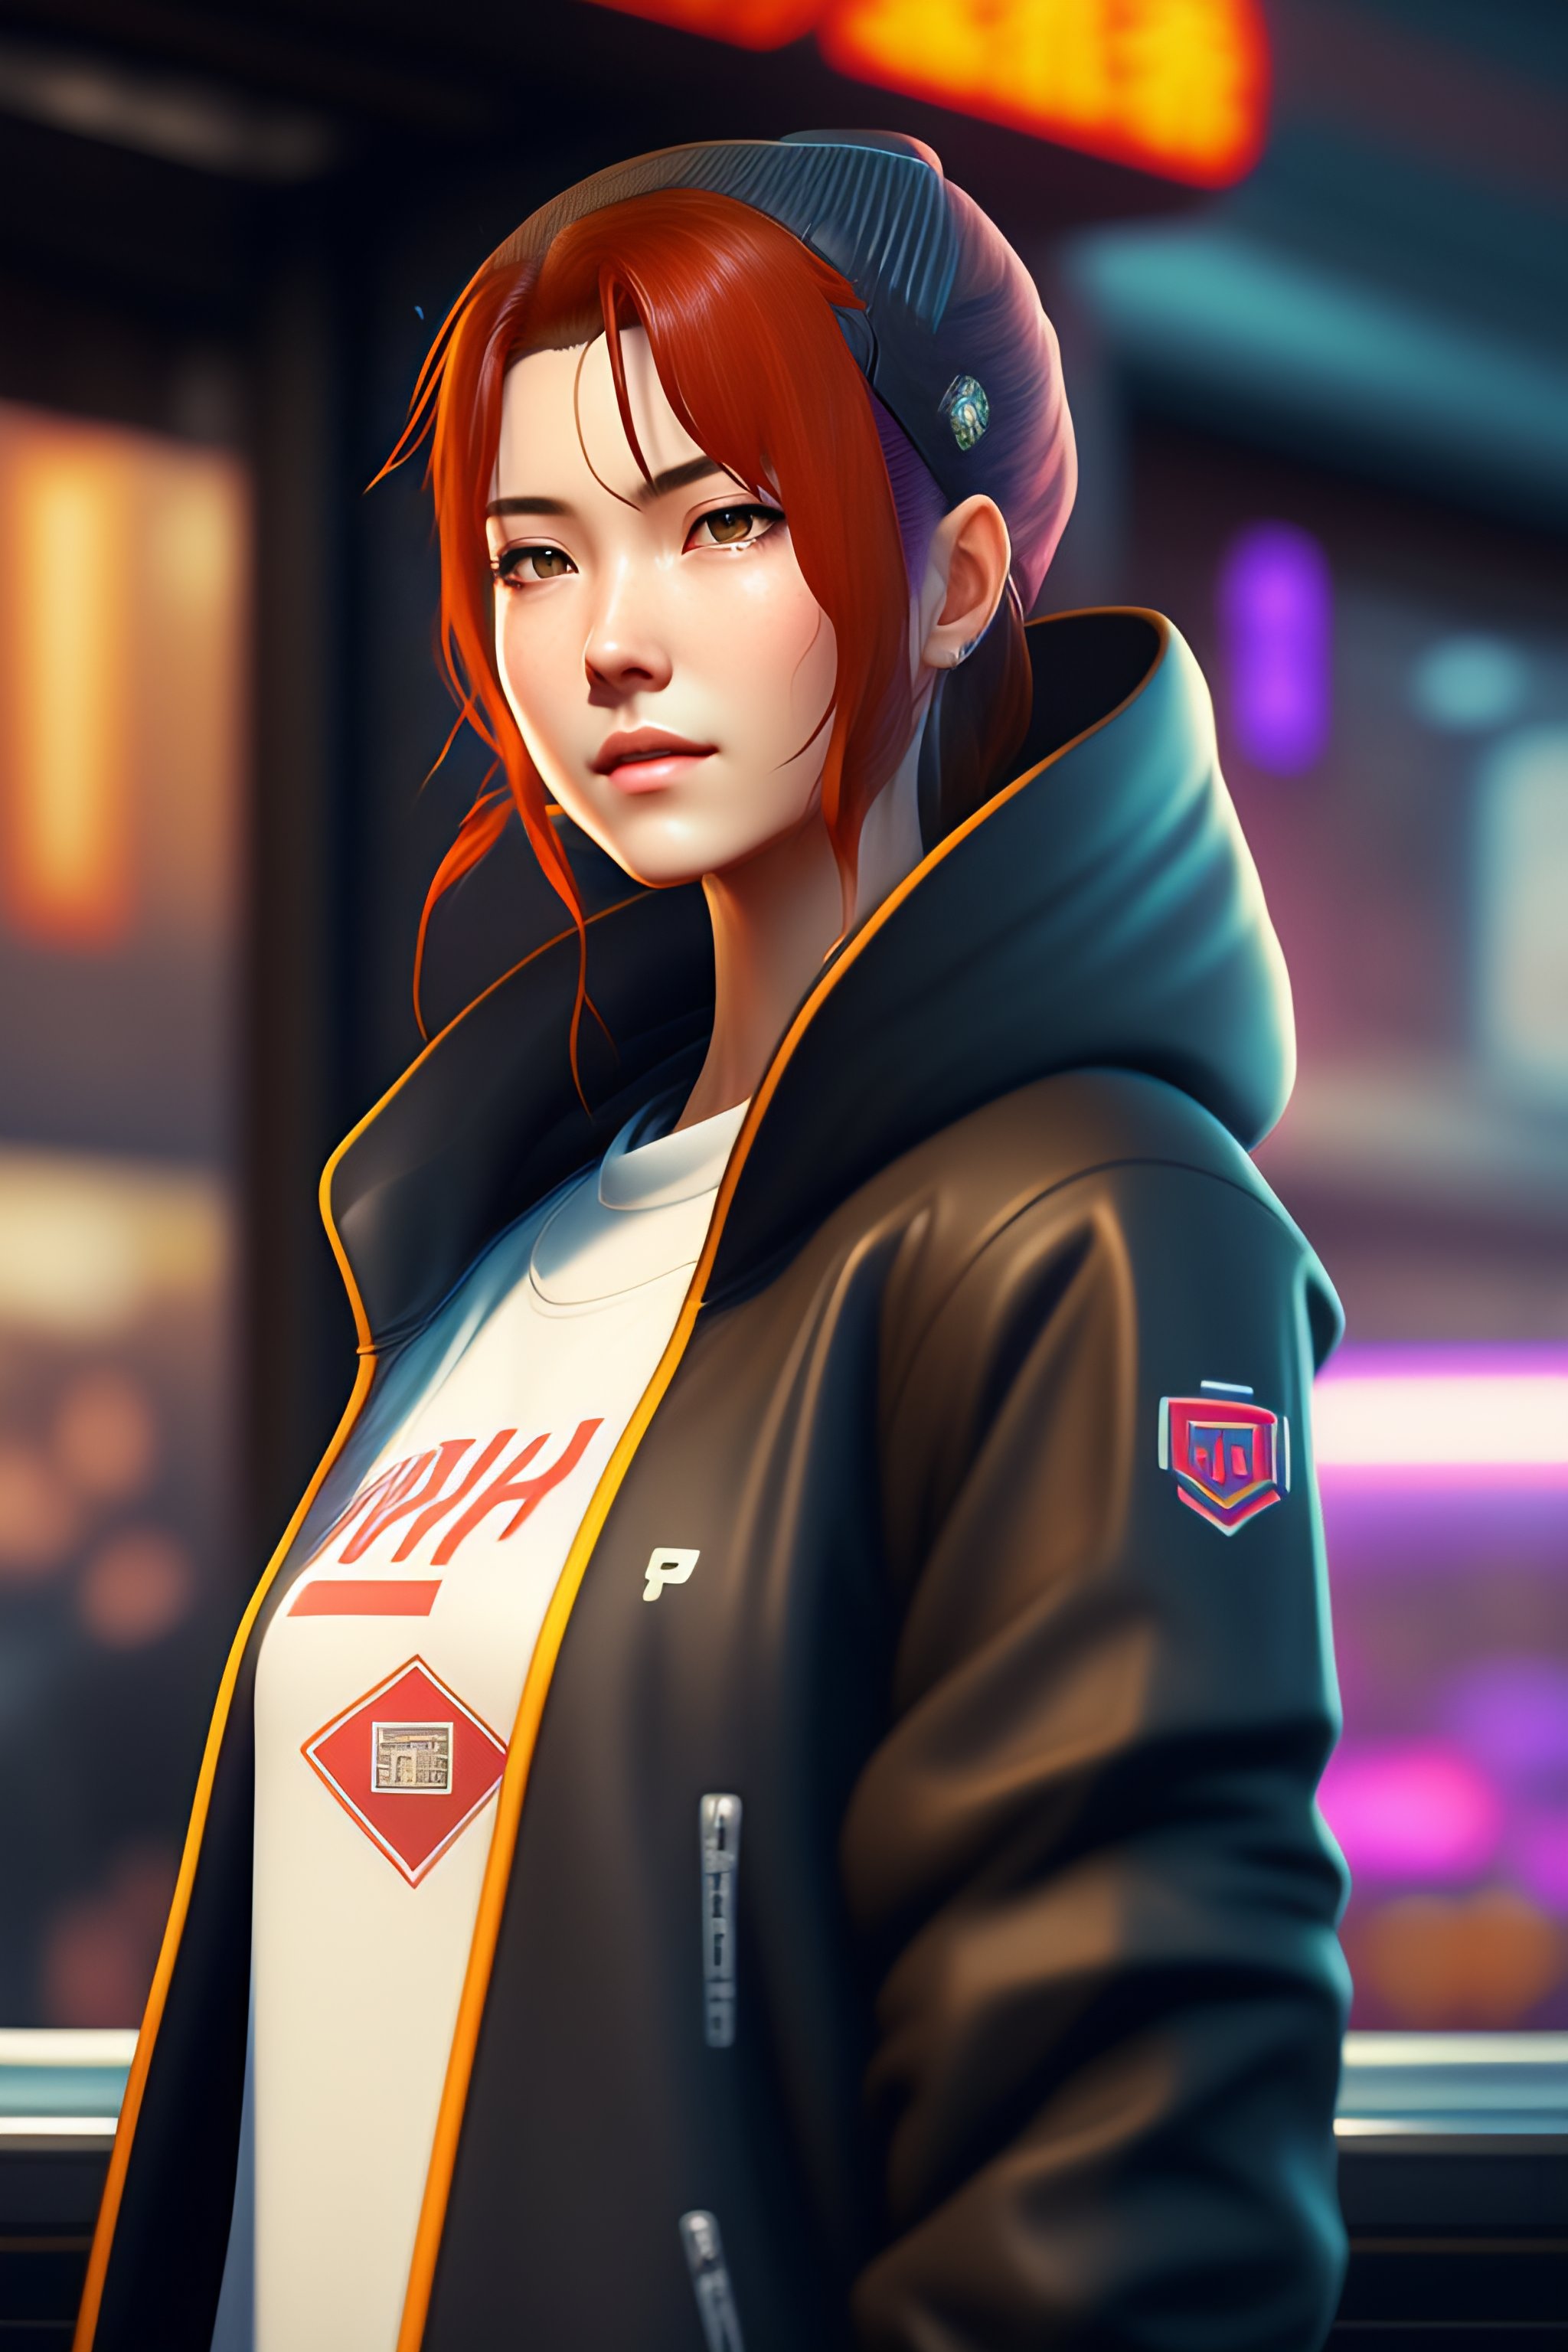 Lexica Cyberpunk City Setting Realistic Young Anime White Woman Wearing A Hoodie Under A 9711